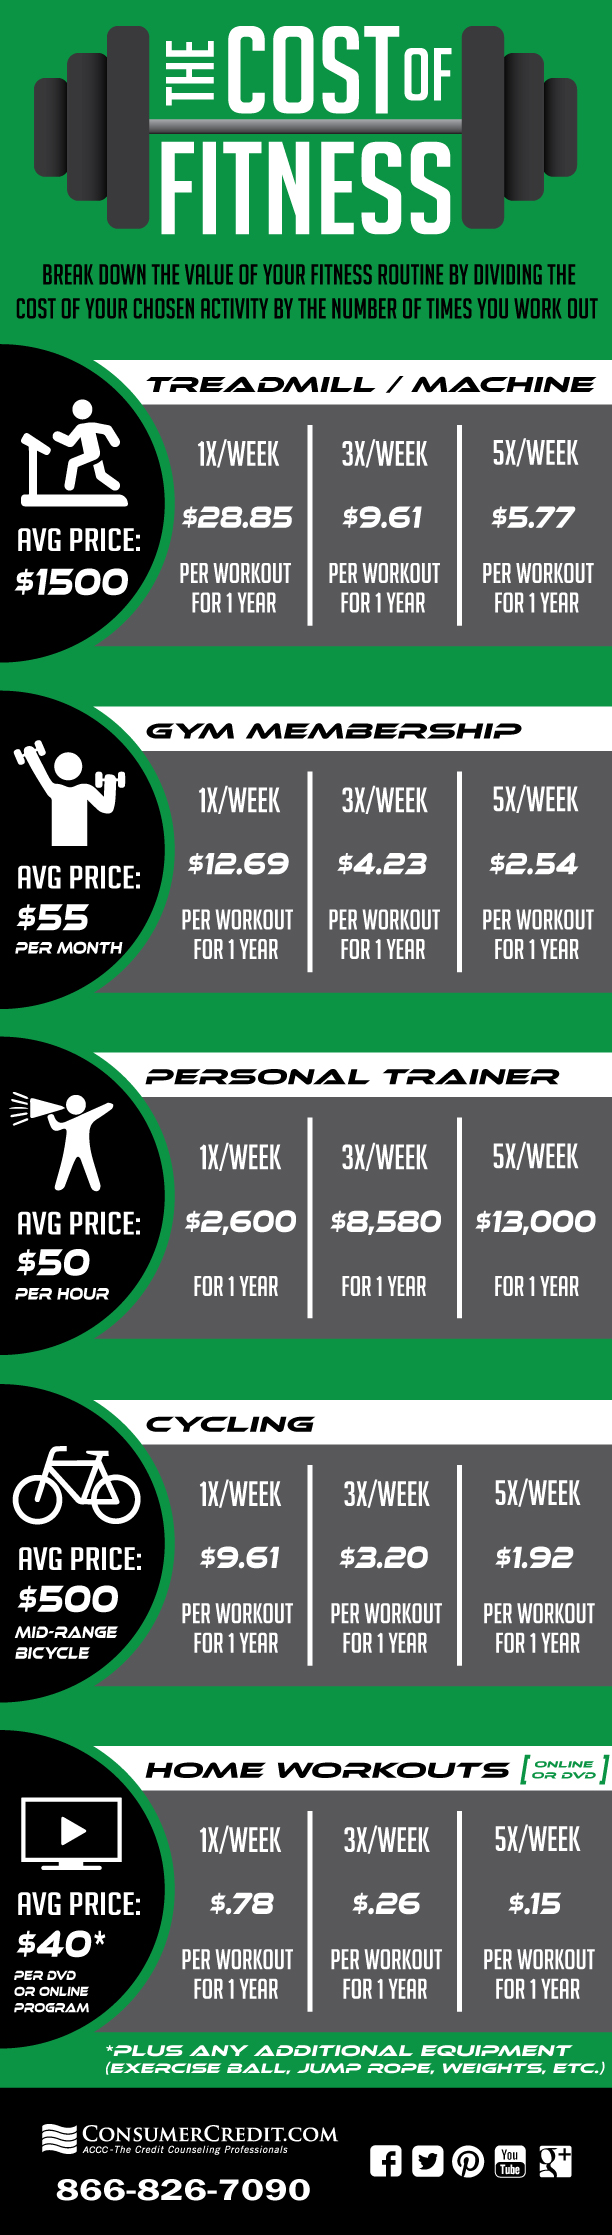 Cost Of Fitness